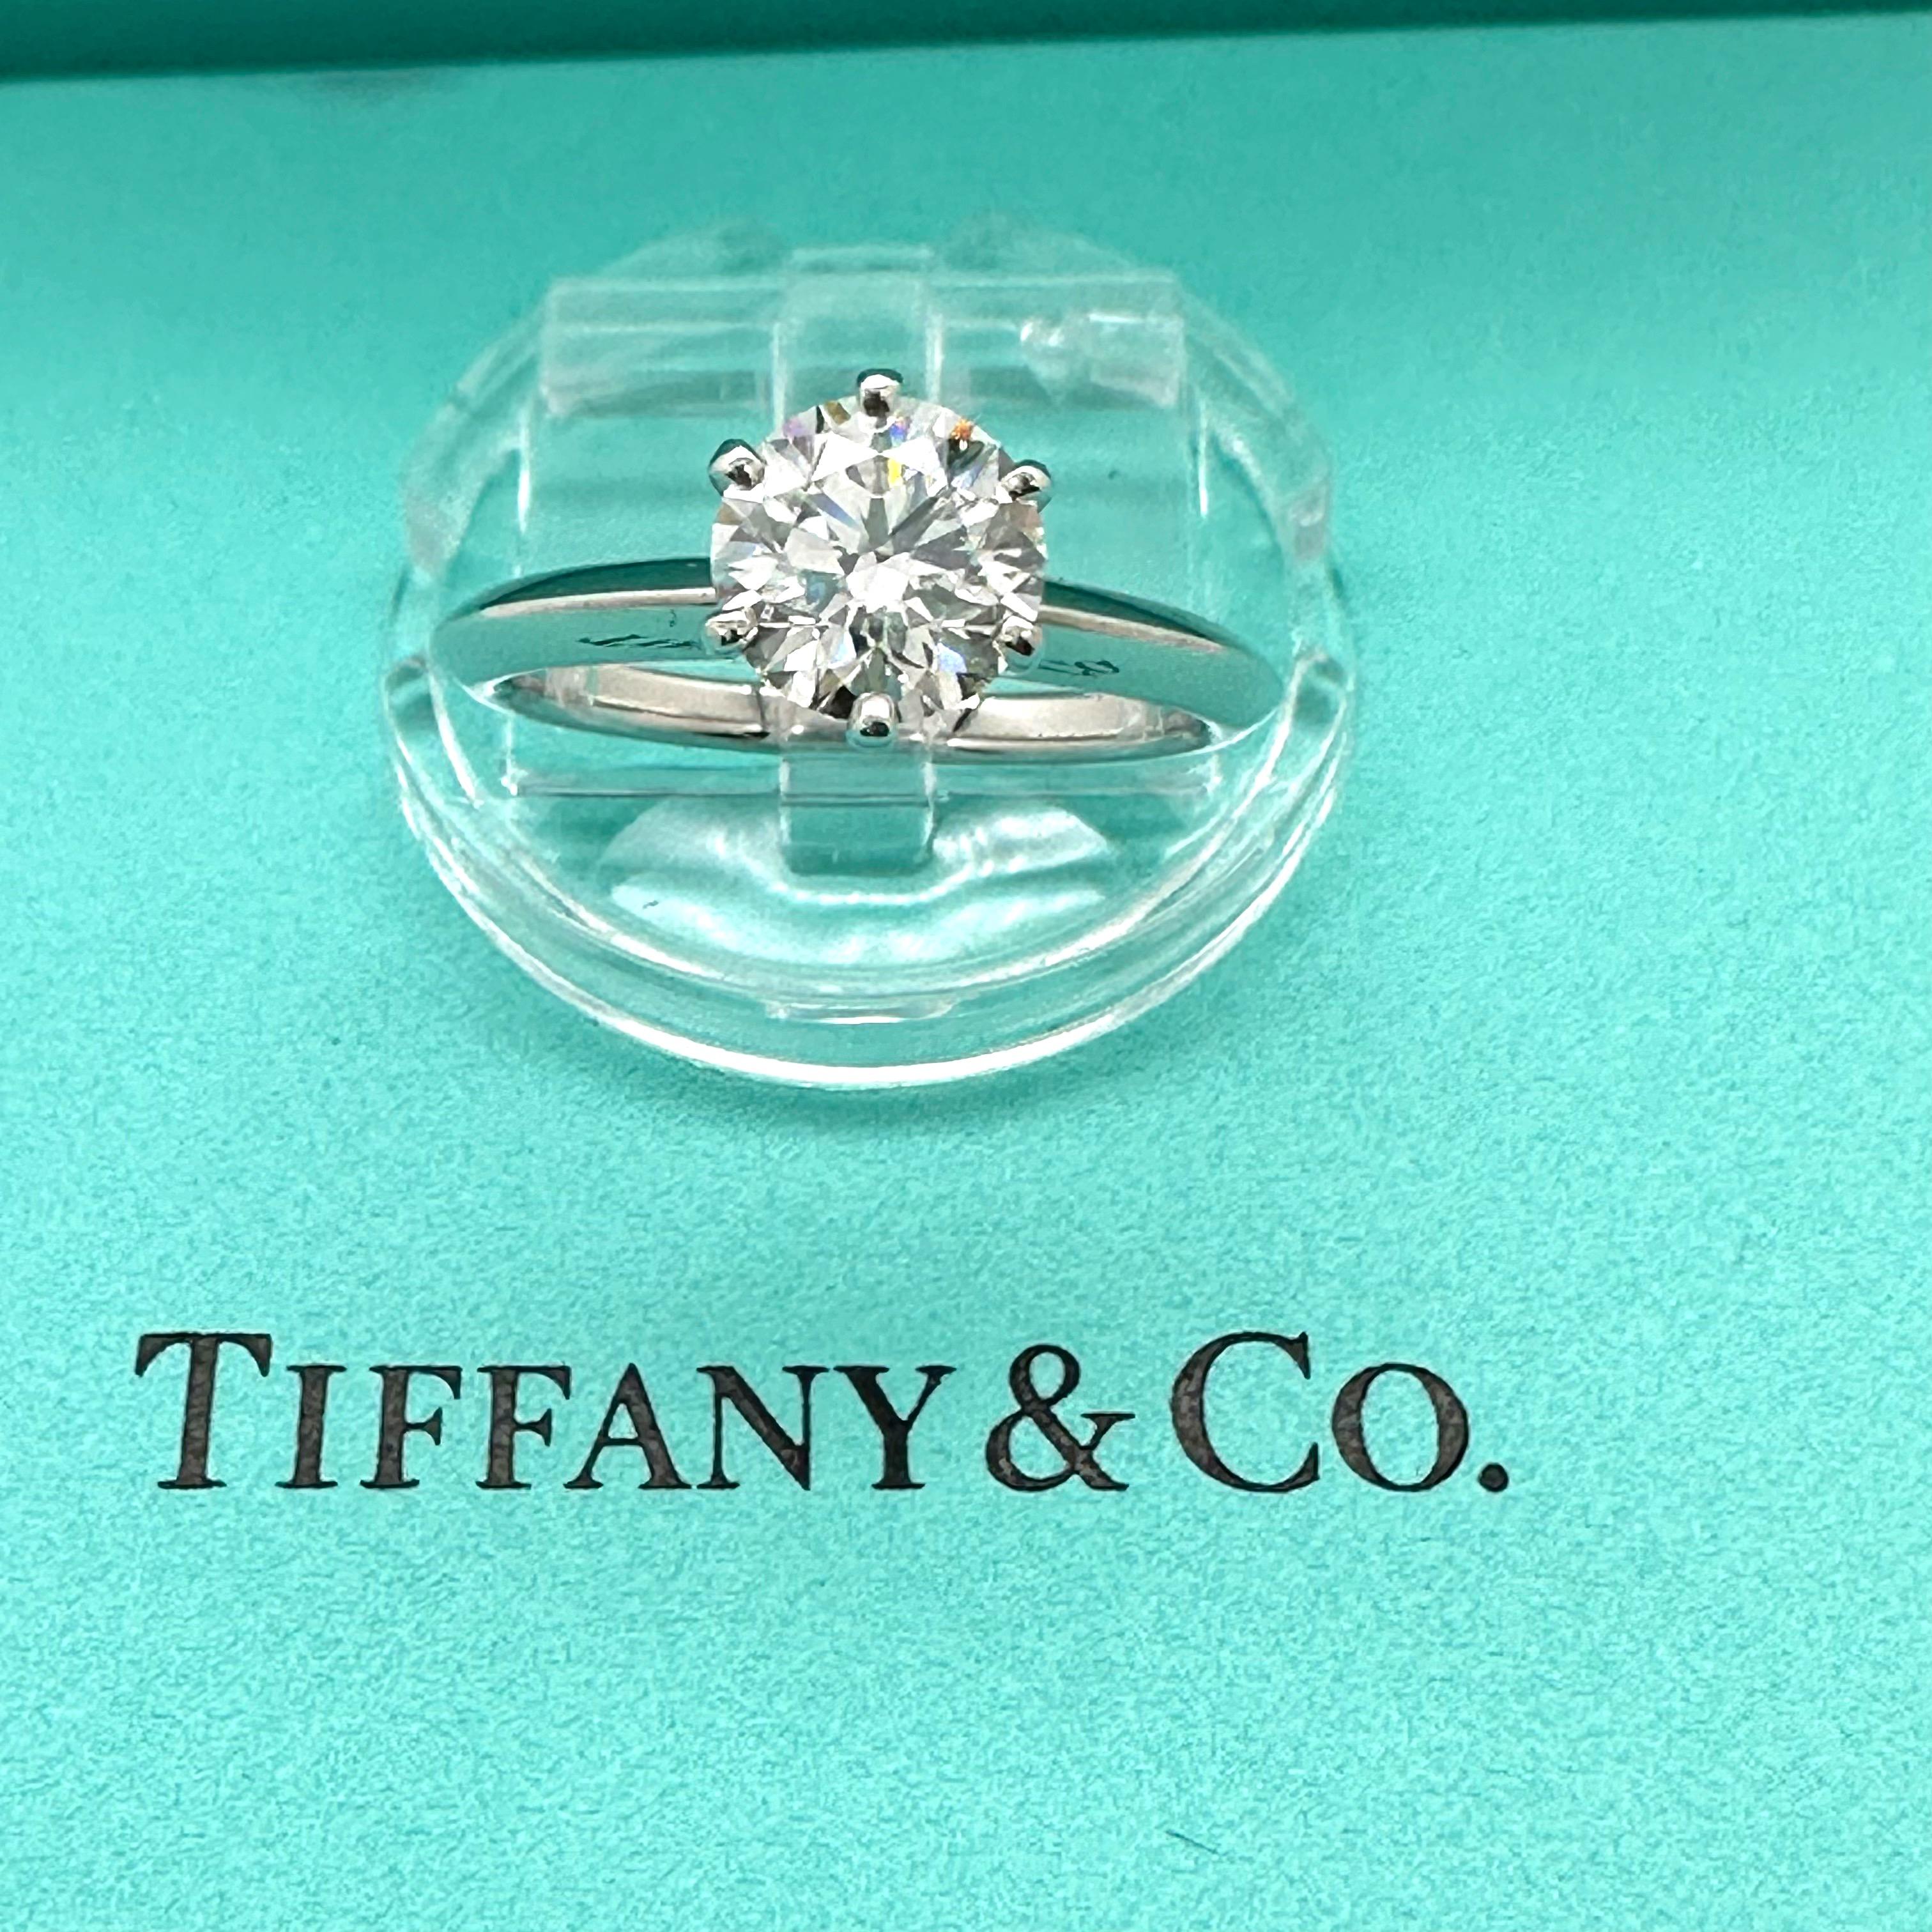 Tiffany & Co. Round Diamond 1.12 CTS G VS1 Solitaire Engagement Ring COA Box For Sale 8